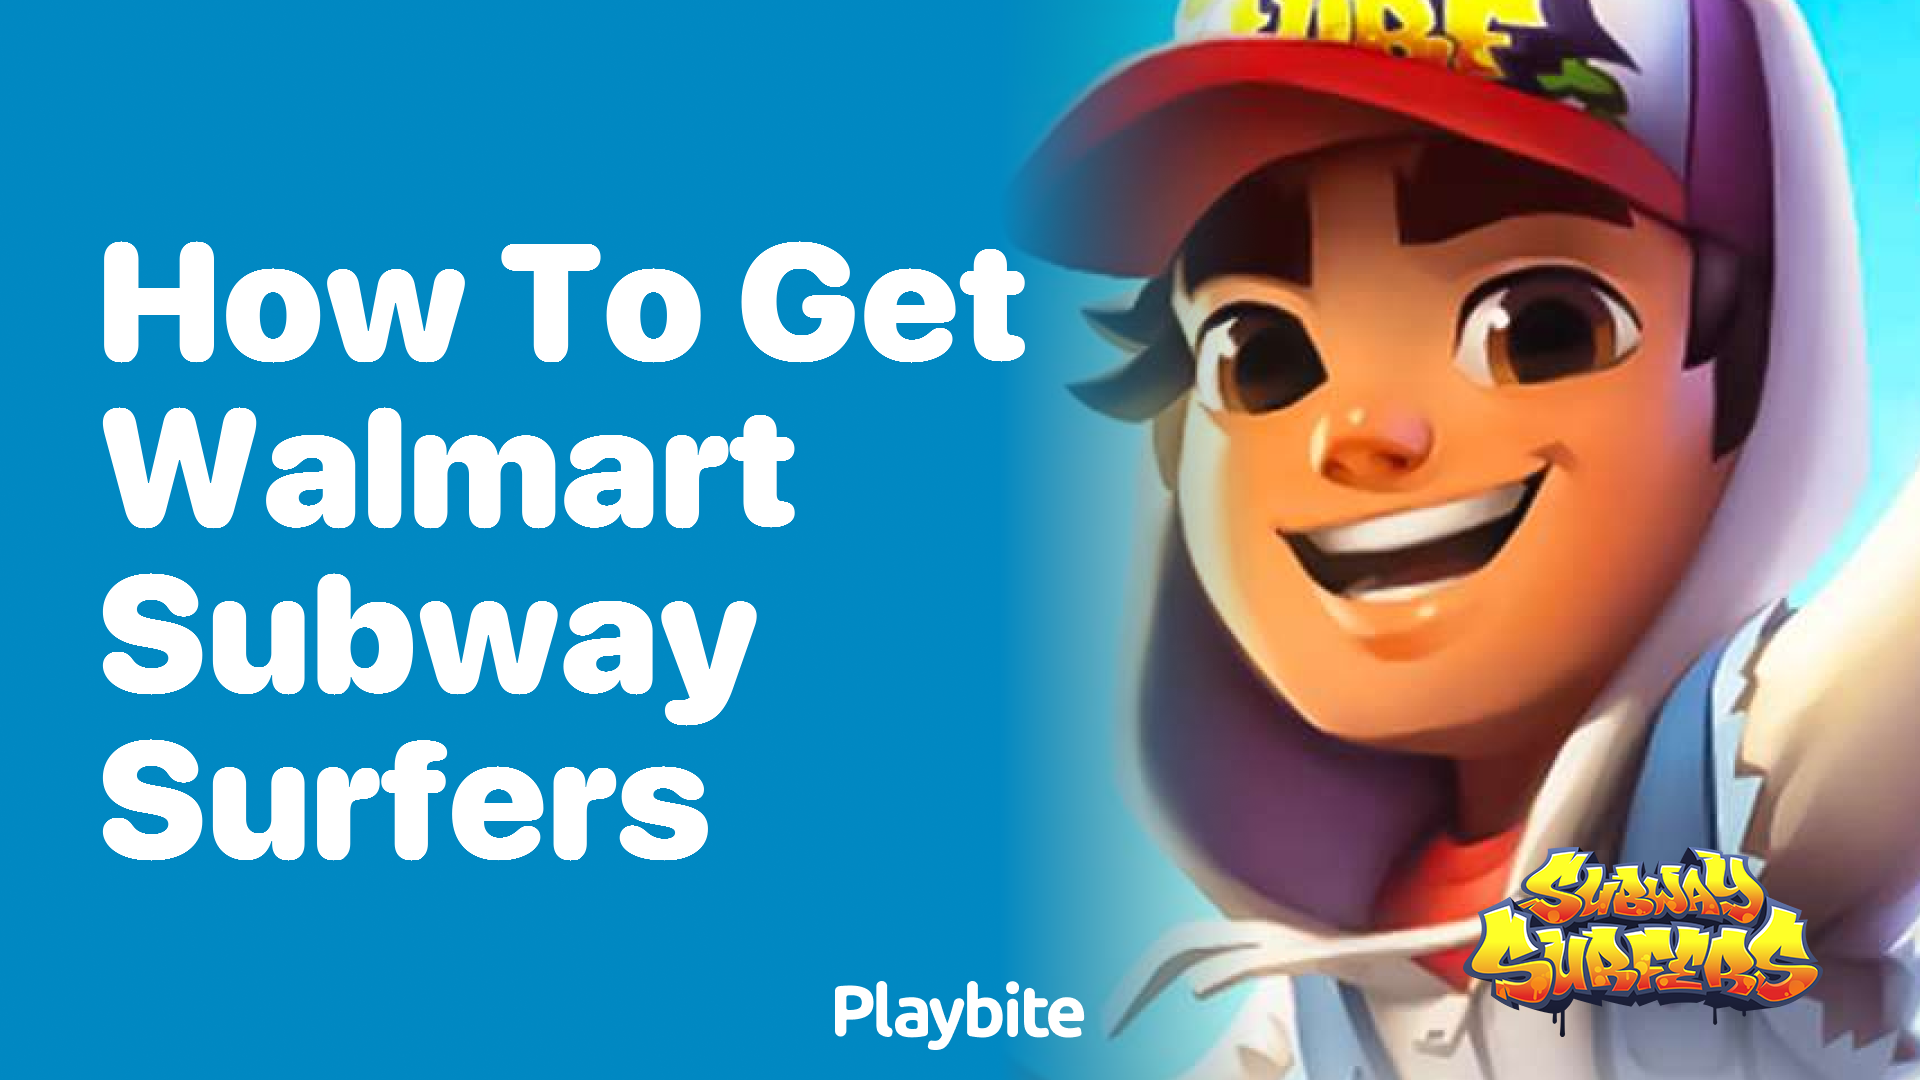 How to Get Walmart Subway Surfers